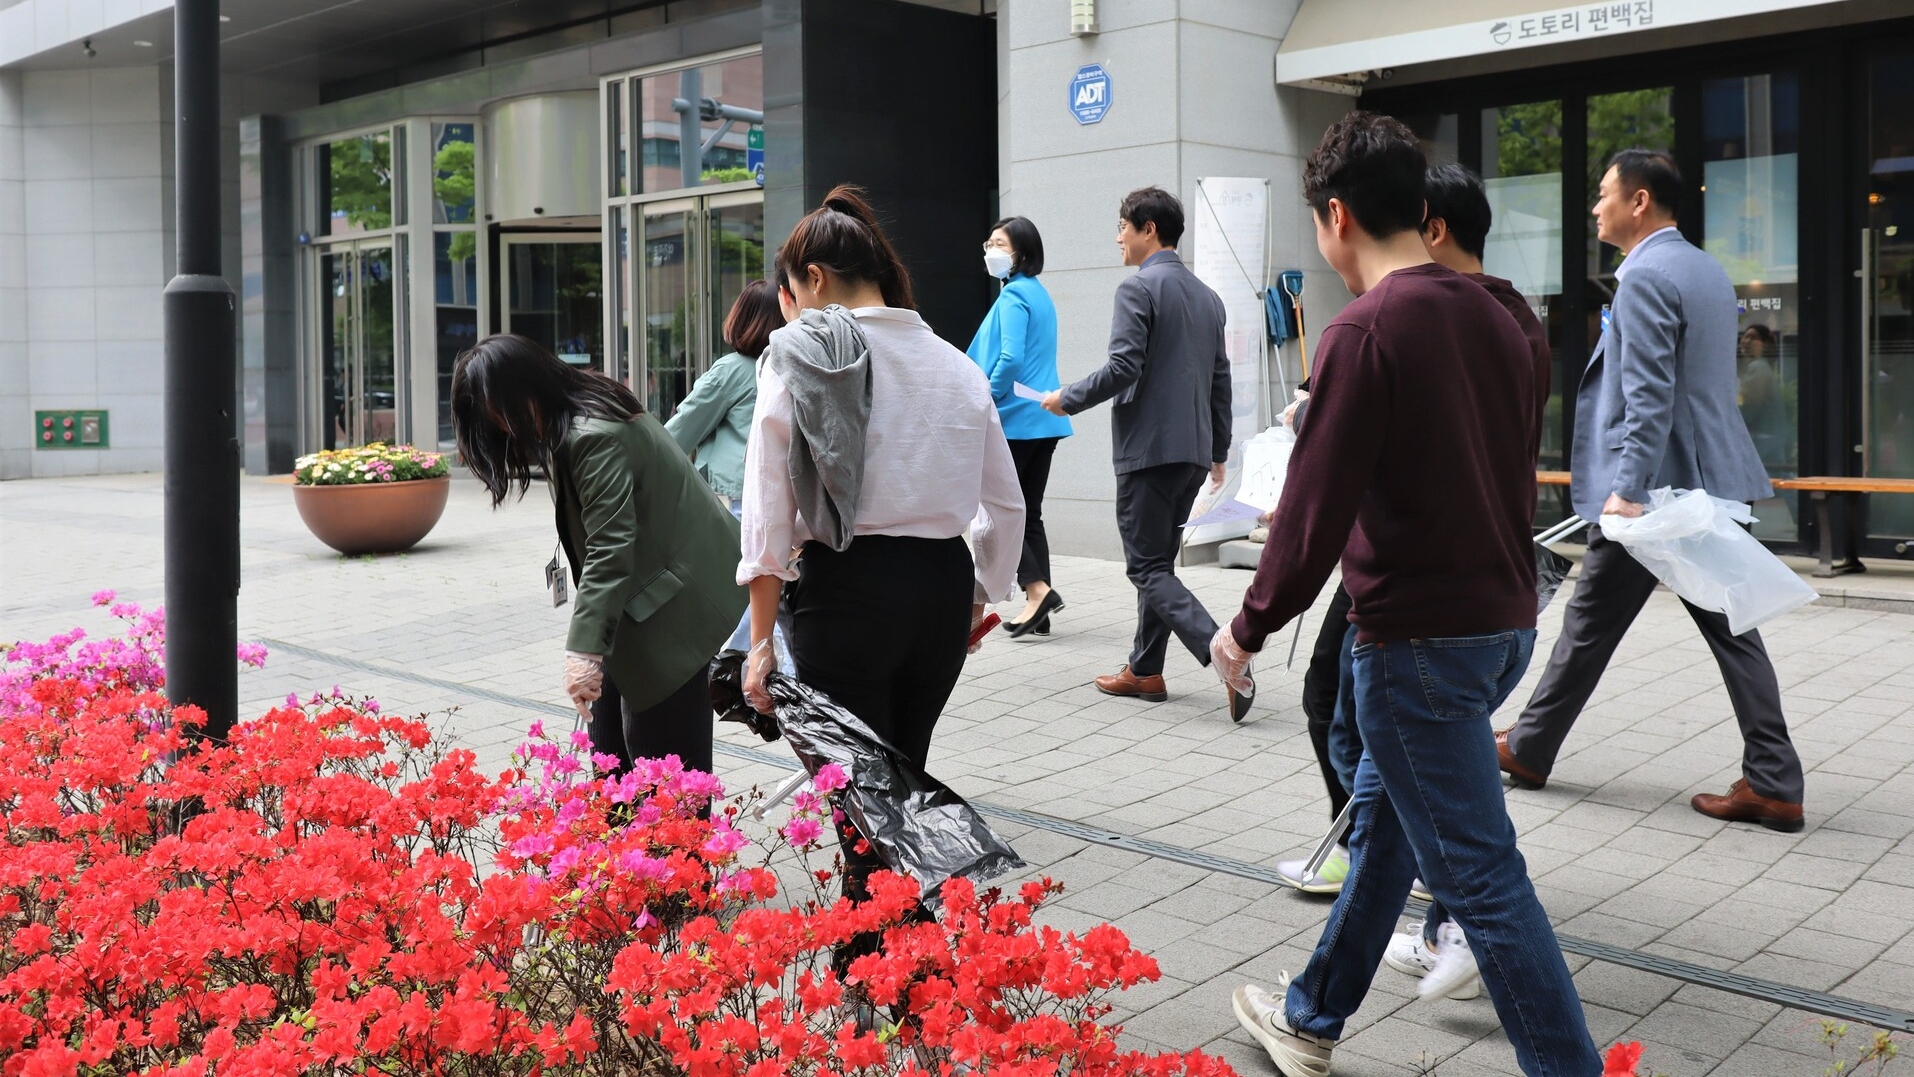 ZEISS employees in Korea picking up litter on earth day